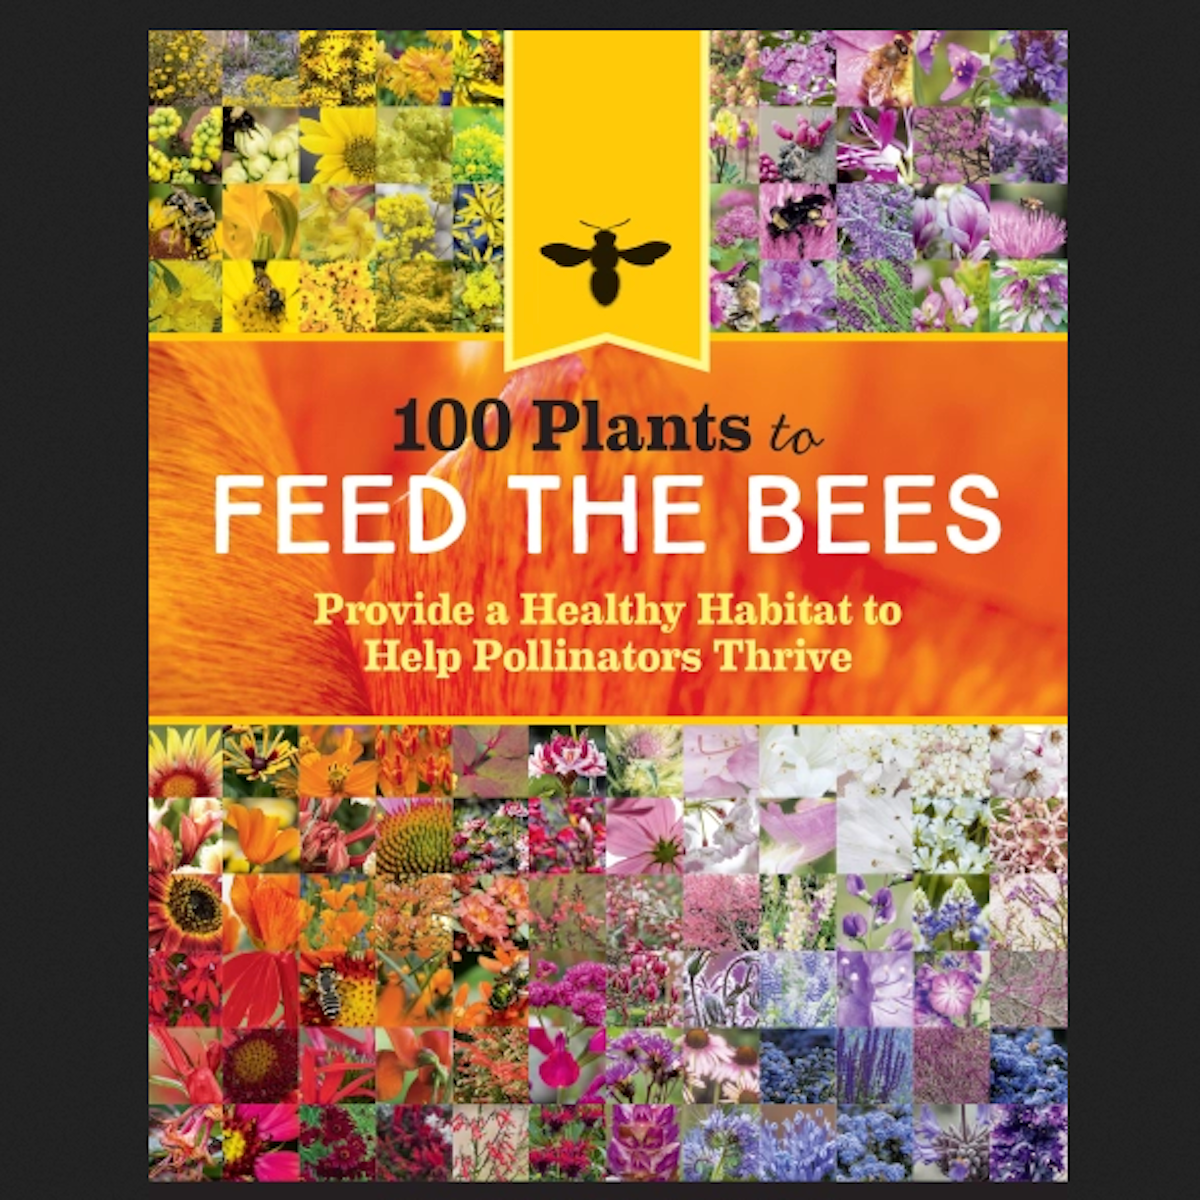 100 Plants to Feed The Bees, The Xerces Society